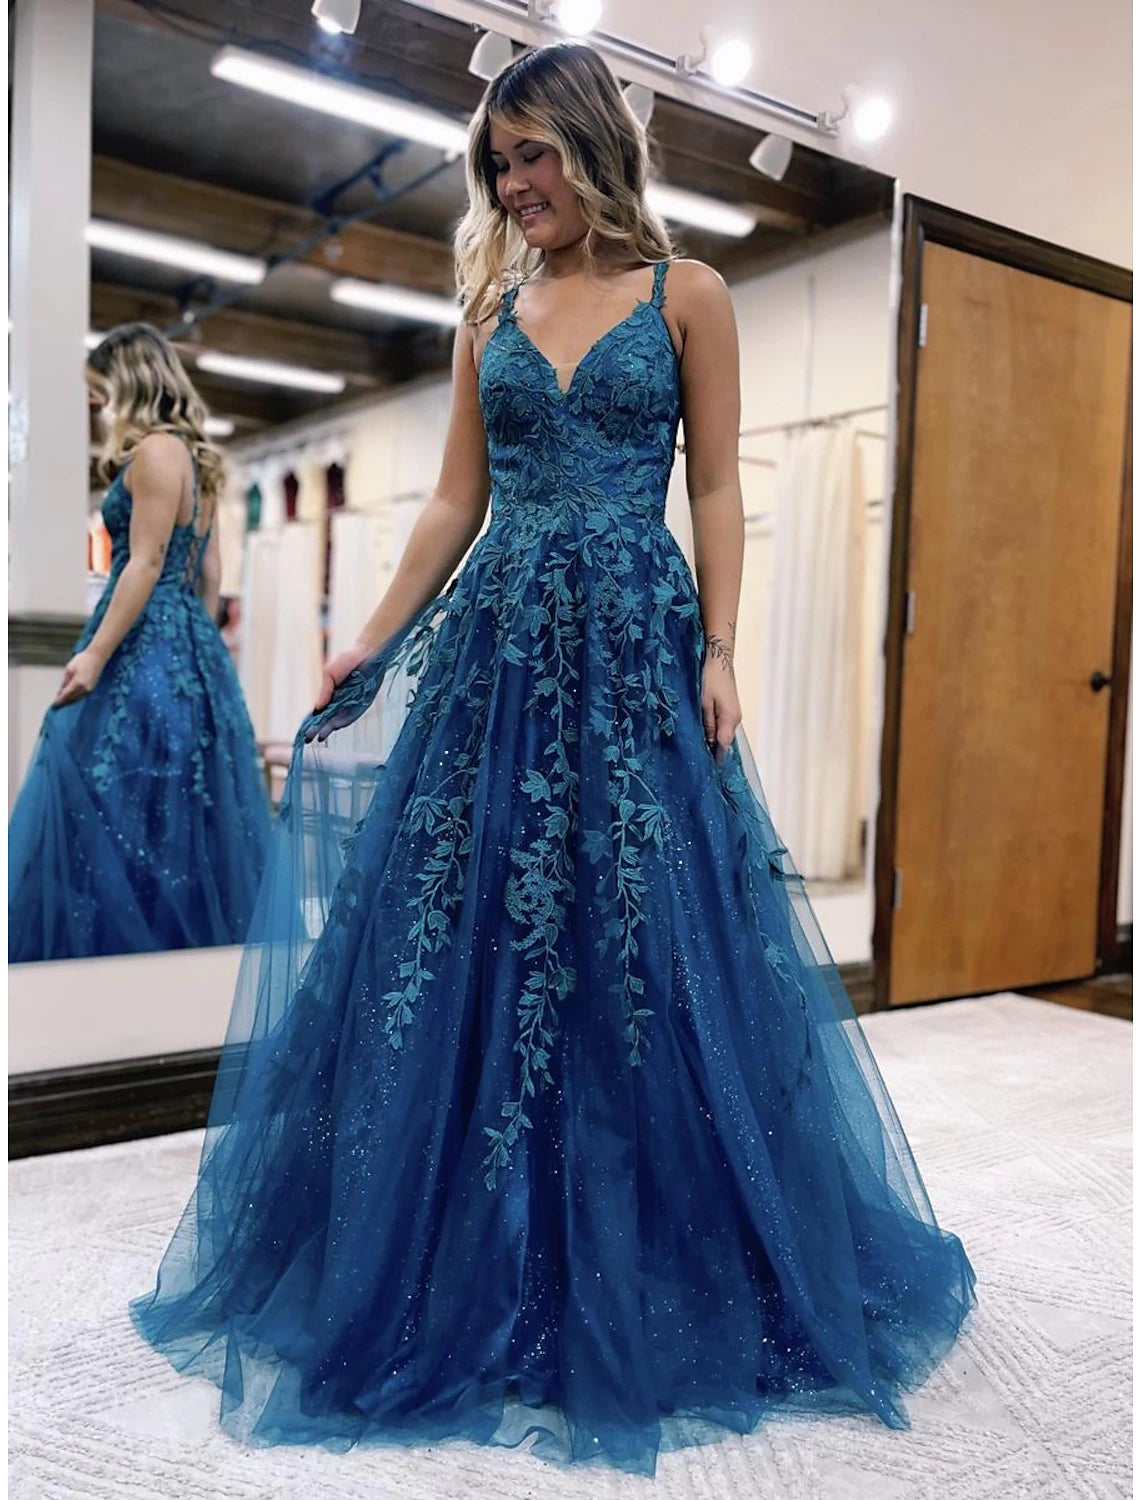 Wholesale  Ball Gown A-Line Prom Dresses Sparkle & Shine Dress Formal Wedding Party Floor Length Sleeveless V Neck Tulle Backless with Glitter Appliques